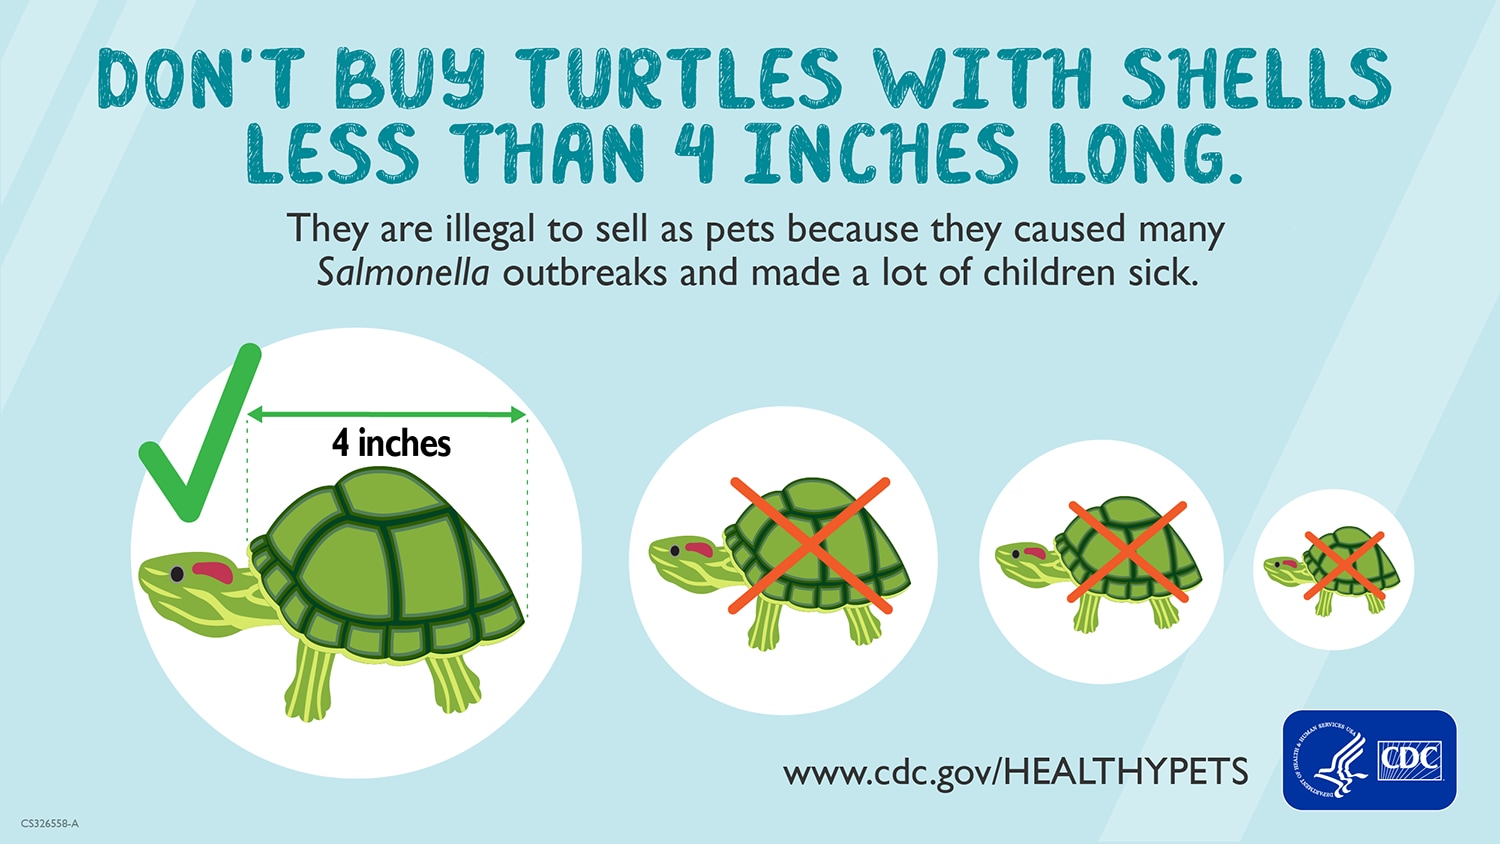 Graphic stating to not buy turtles with shells less than 4 inches long.